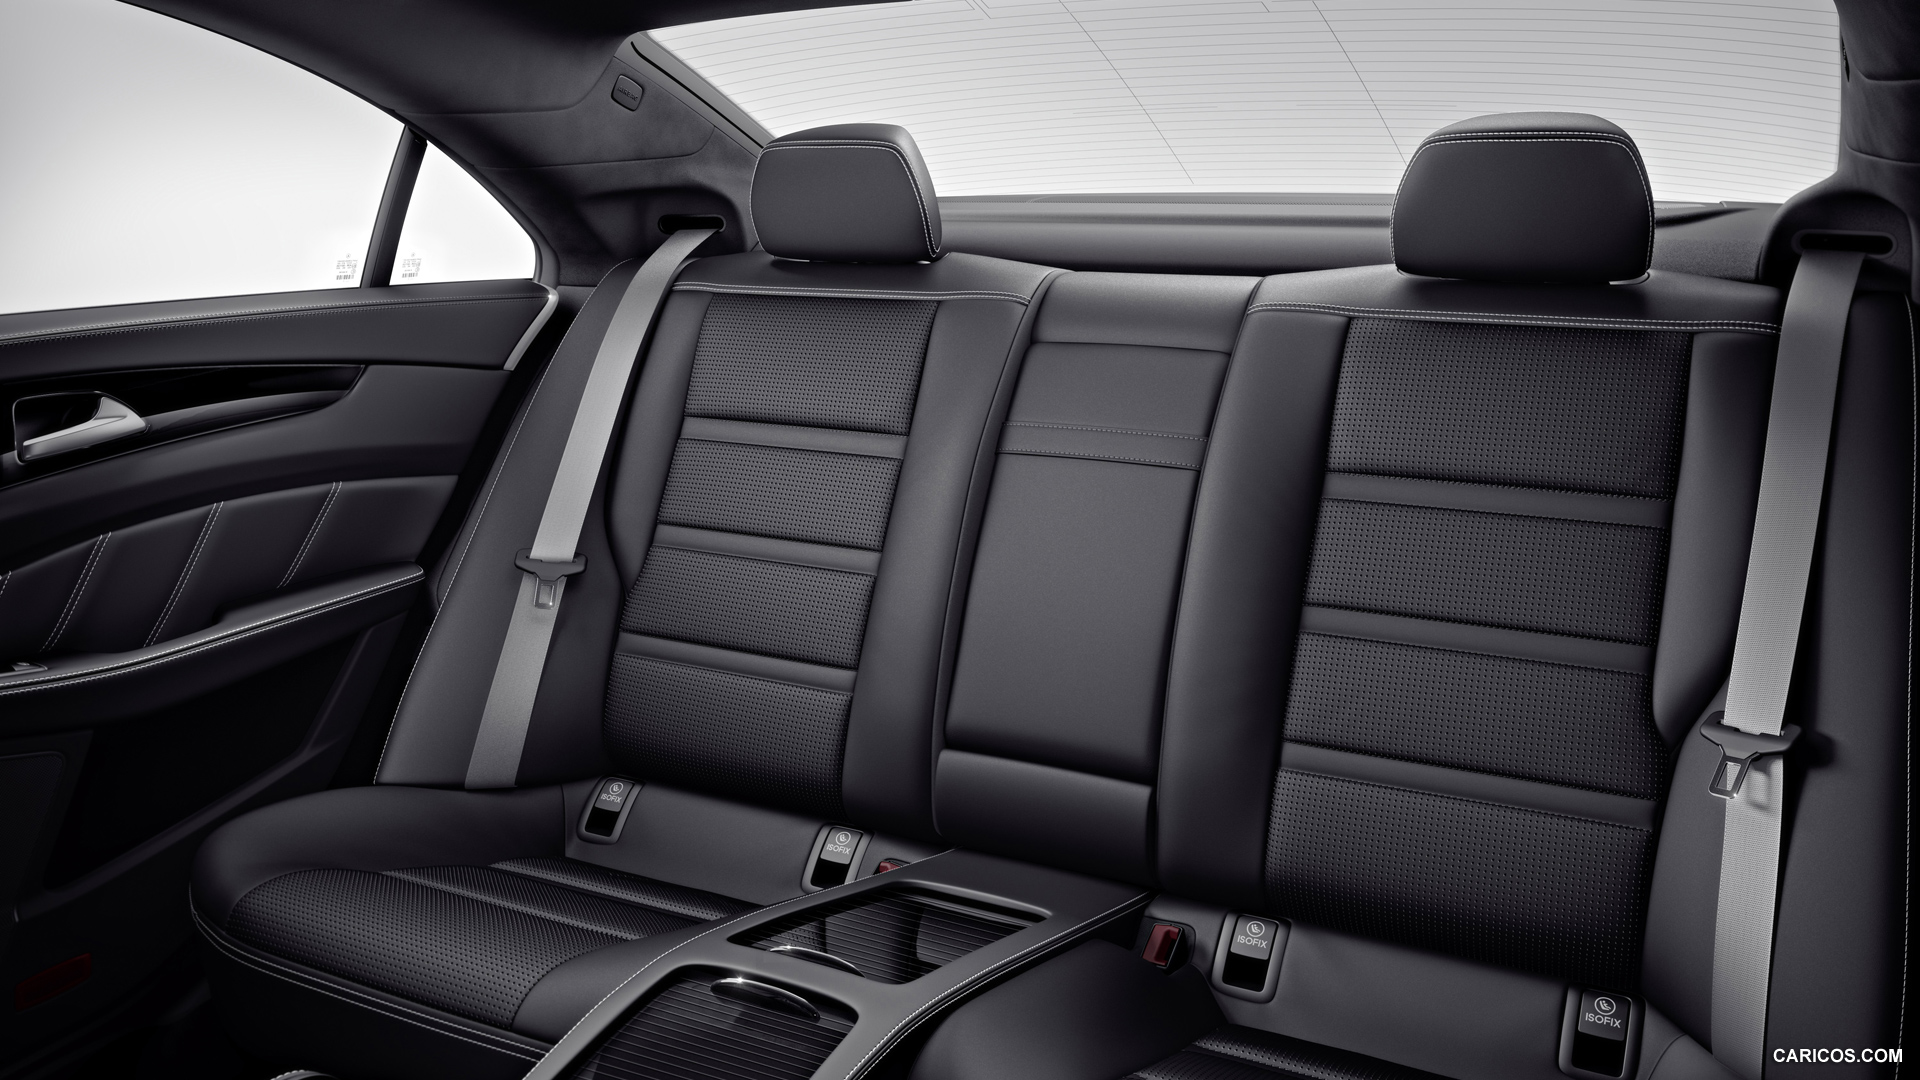 2014 Mercedes-Benz CLS 63 AMG Coupe S-Model - Interior Rear Seats, #15 of 16